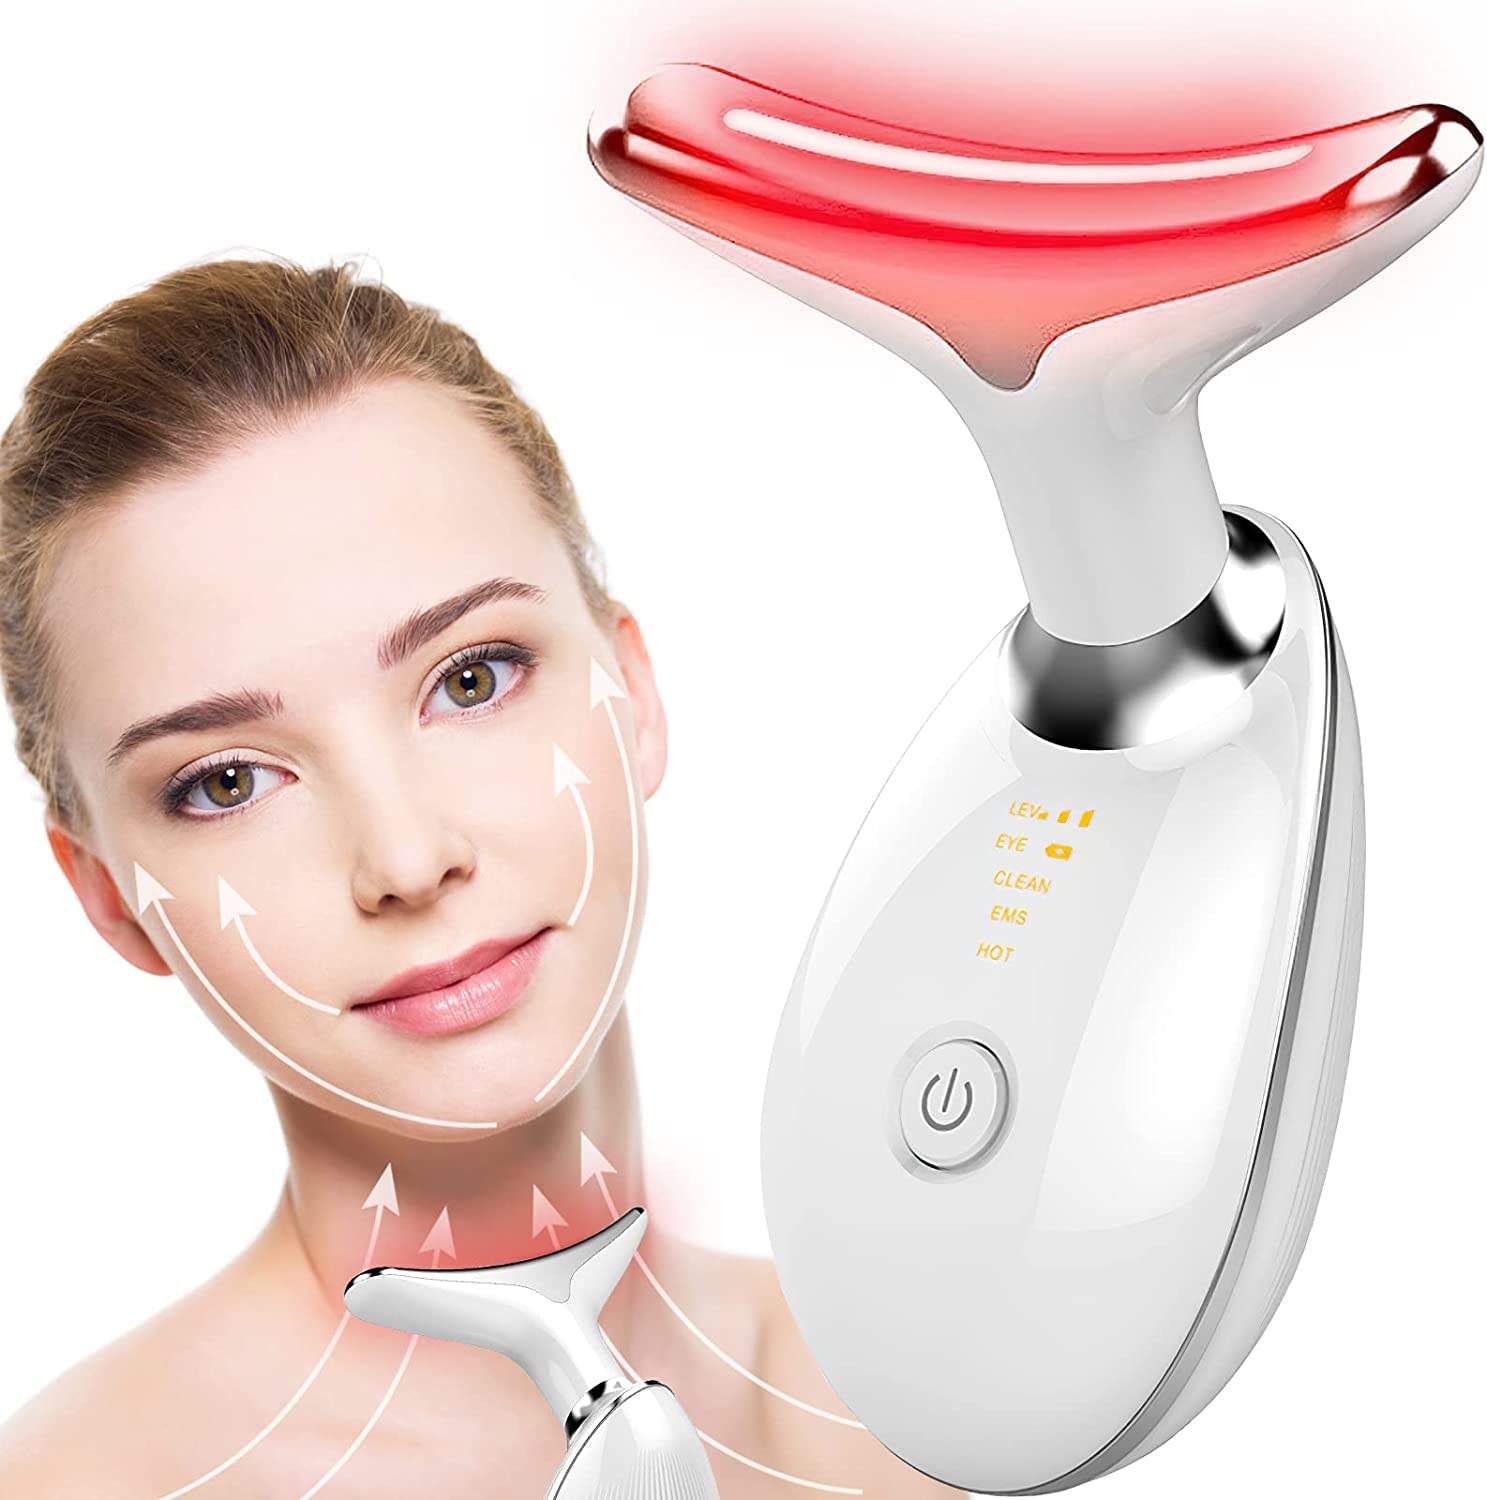 SkyShopy Neck Face Firming Wrinkle Removal Tool Double Chin Reducer Vibration Massager Skin Rejuvenation Beauty Device for Face and Neck - Face & Neck Lifting Device Chin Lifting Device, Skin Groomer